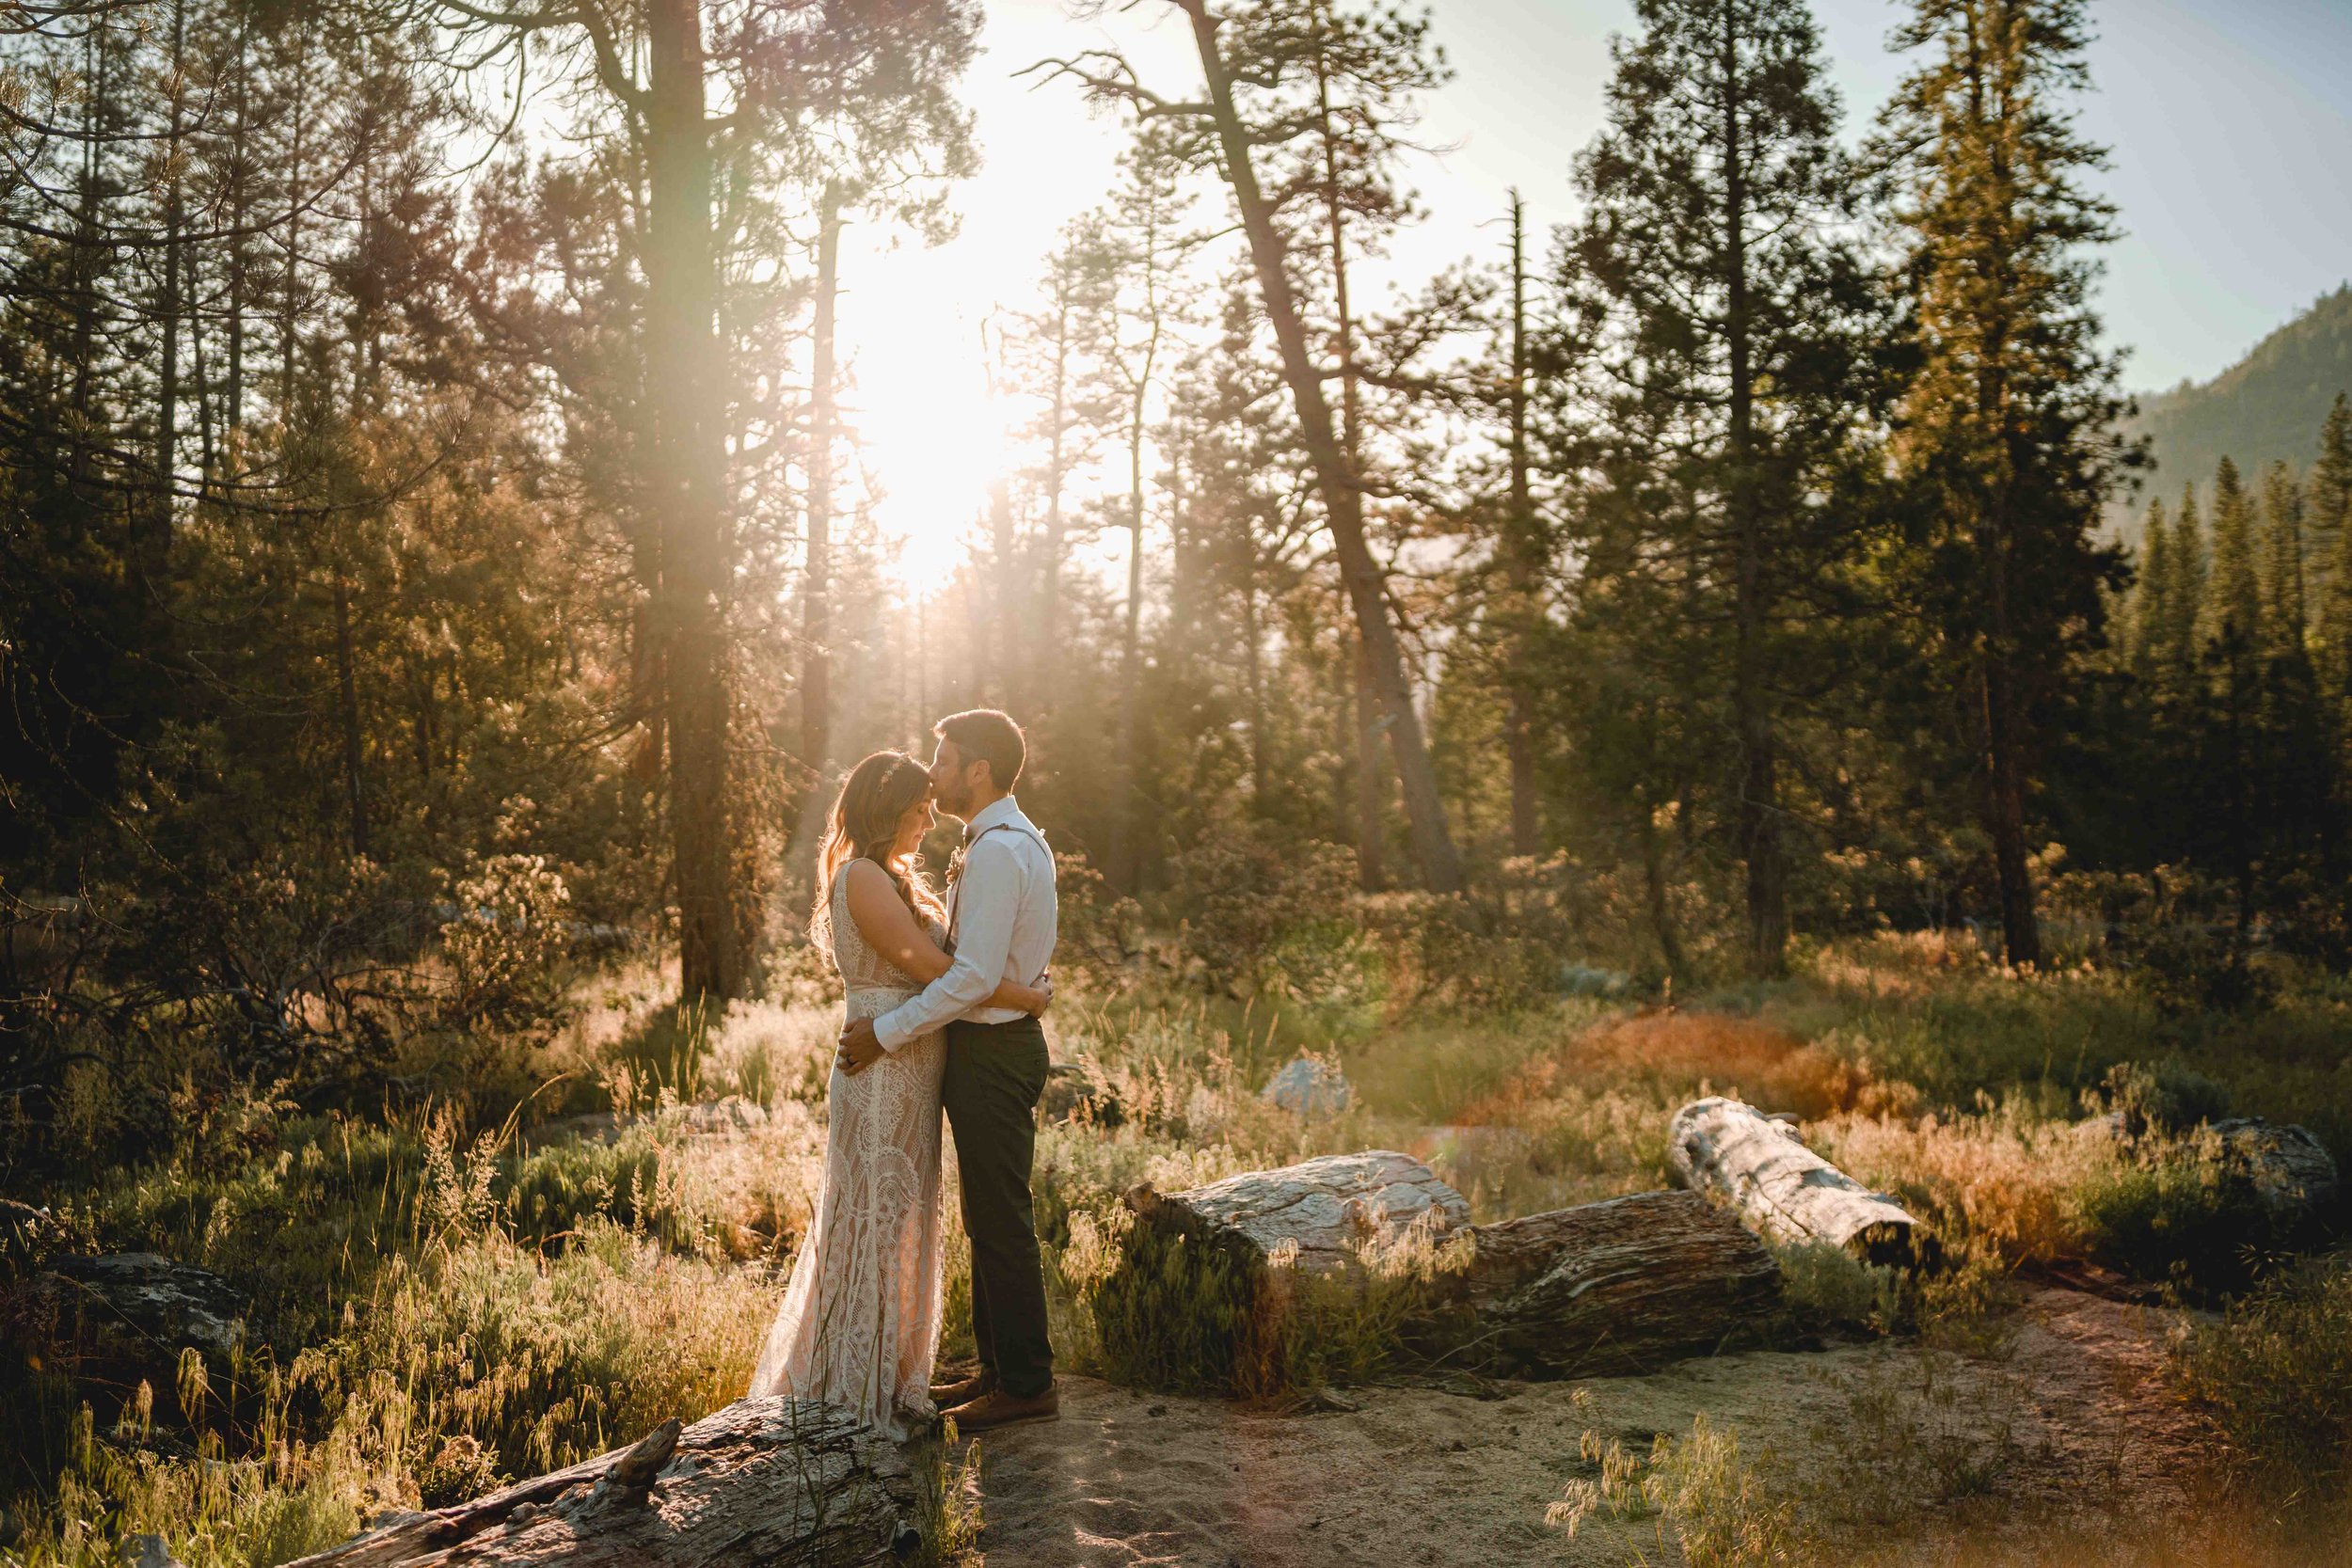 Romanic backlit photo of bride and groom in the forest